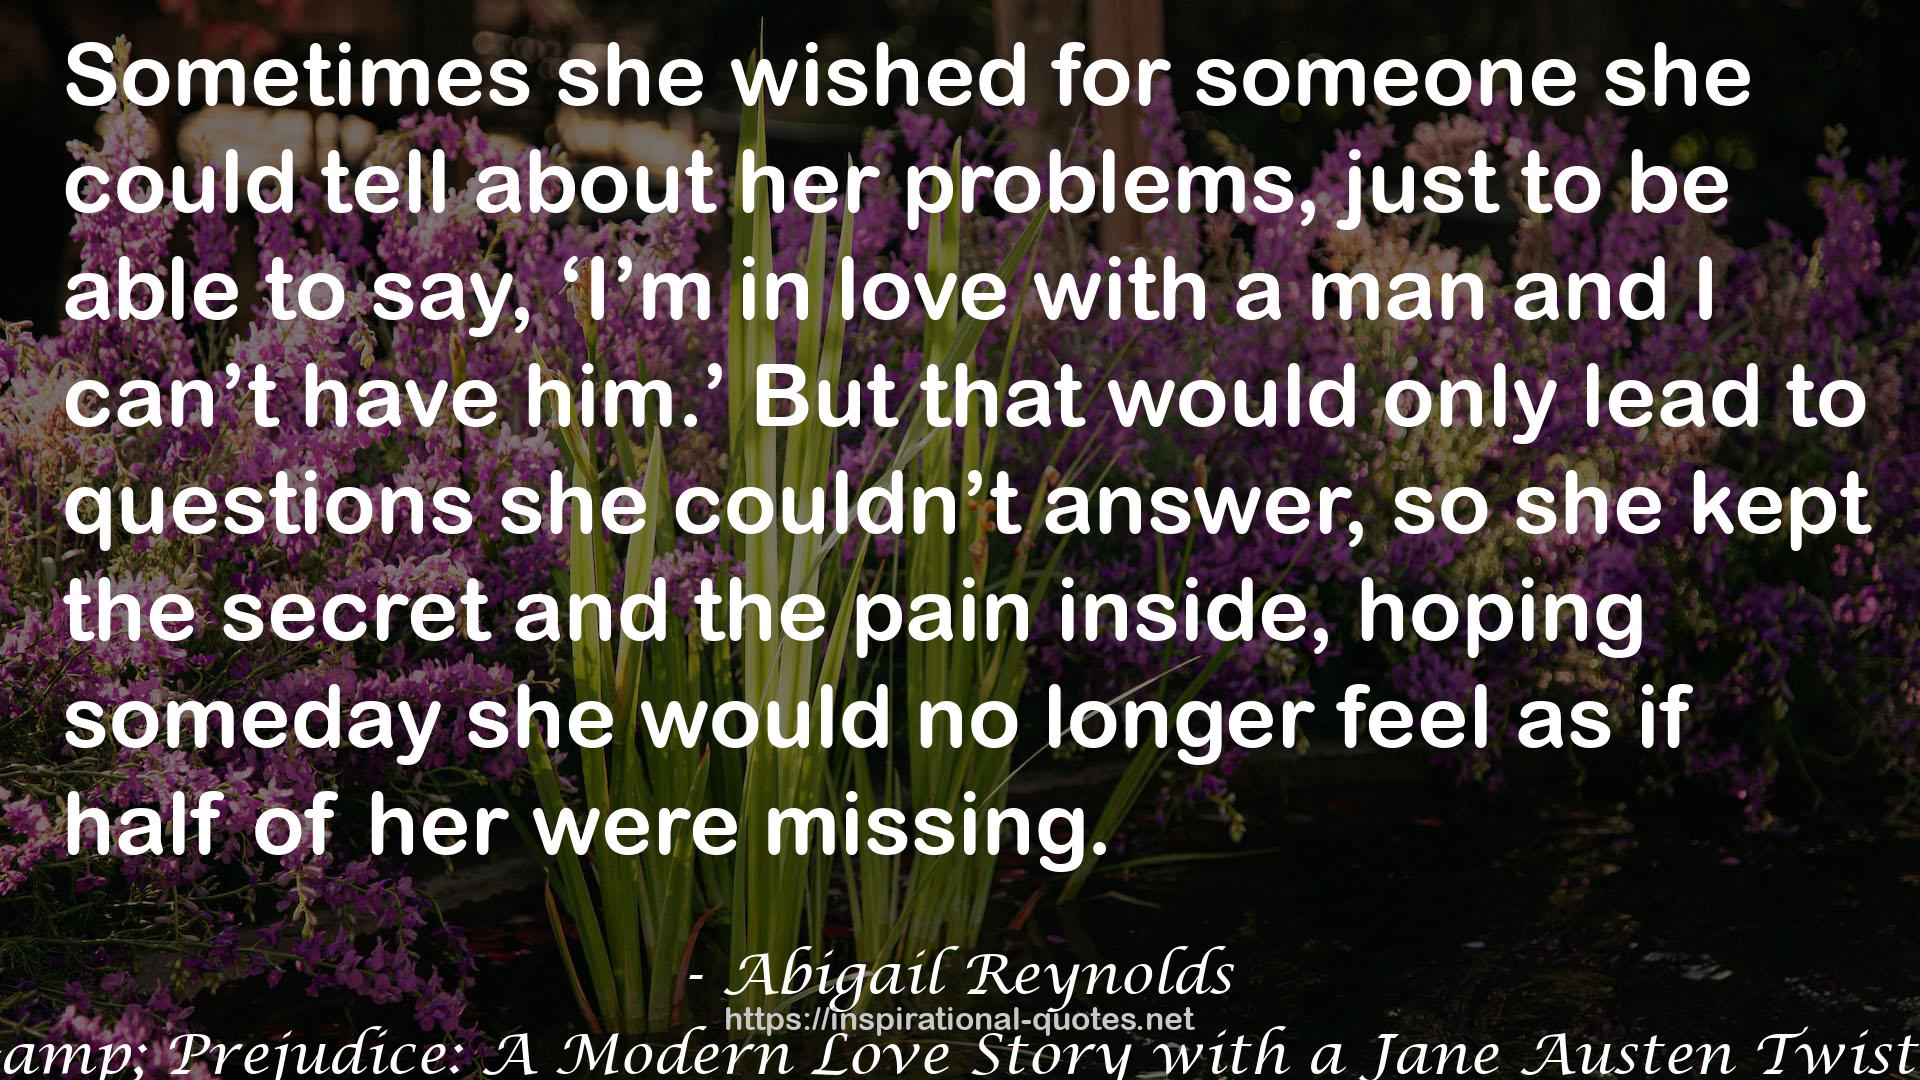 The Man Who Loved Pride & Prejudice: A Modern Love Story with a Jane Austen Twist (The Woods Hole Quartet #1) QUOTES